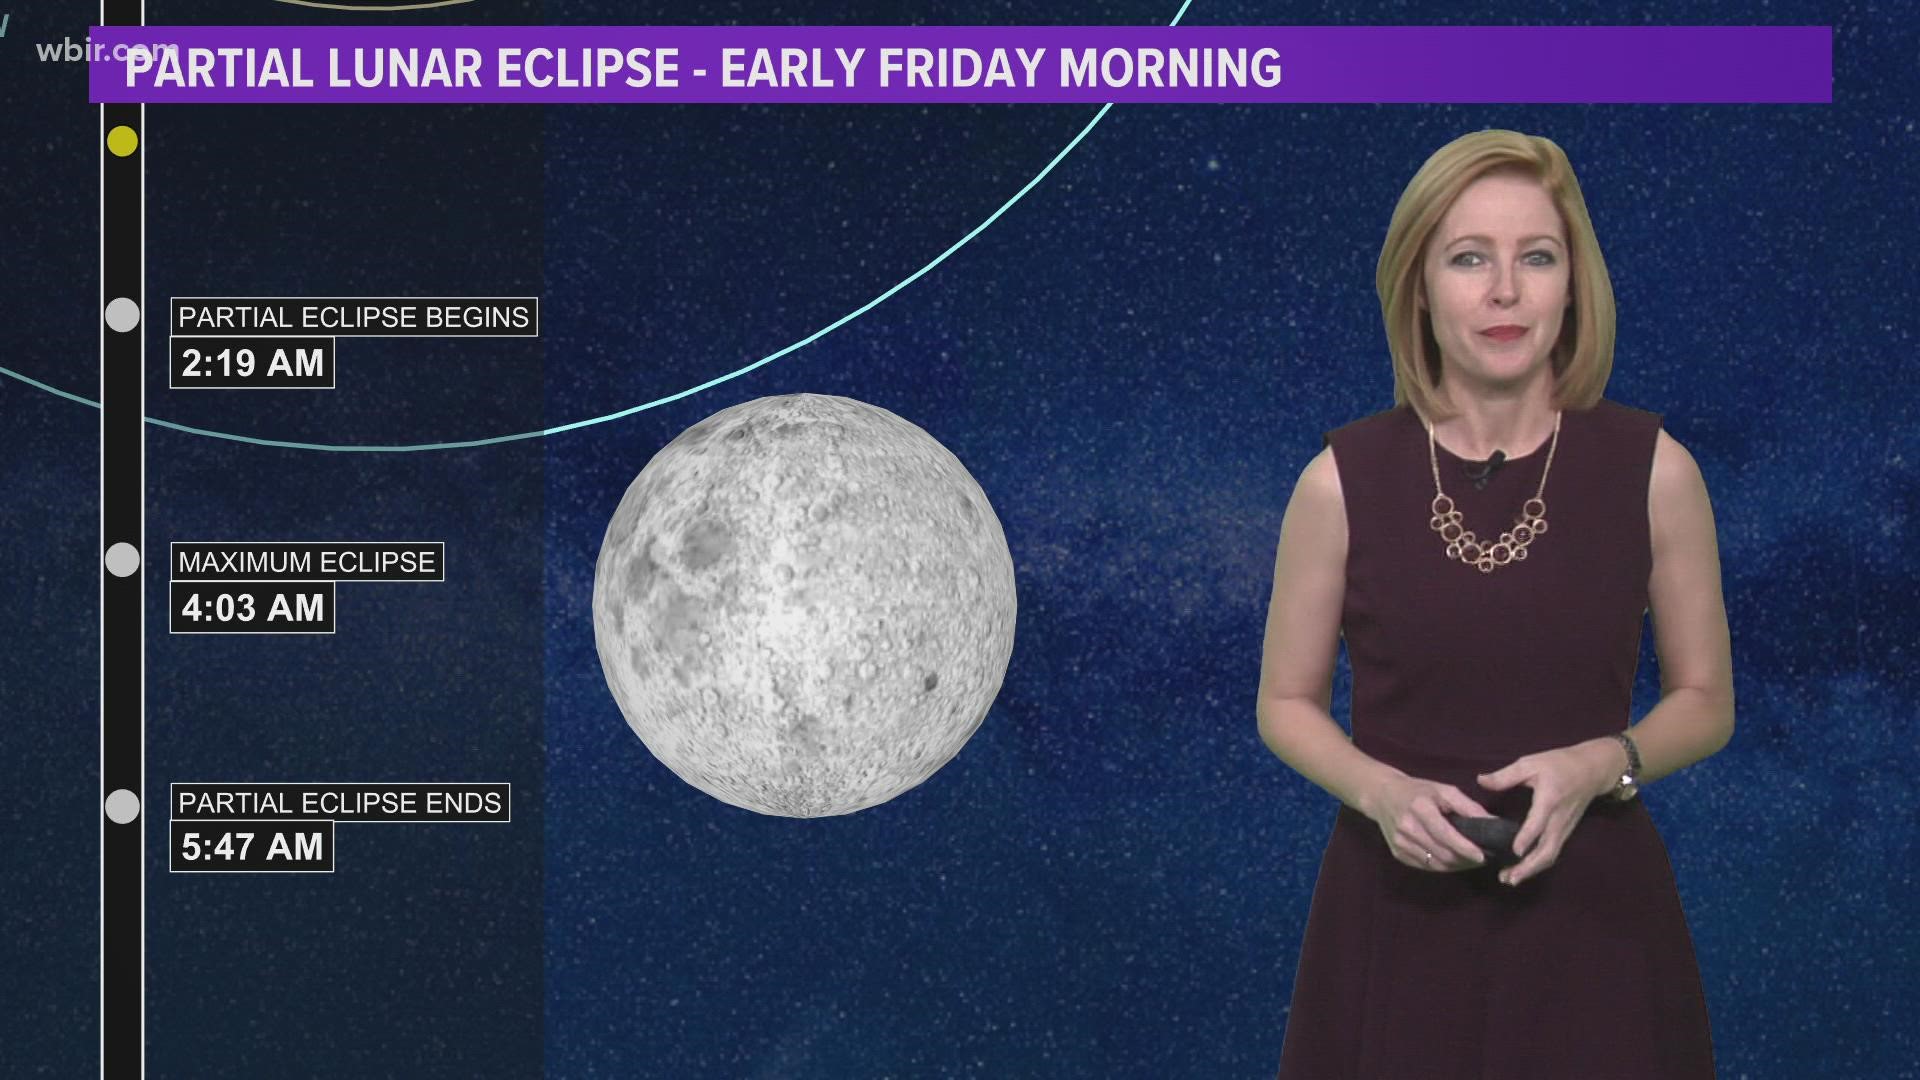 The peak of the partial eclipse will be visible at peak of the eclipse at 4:02 a.m. ET.